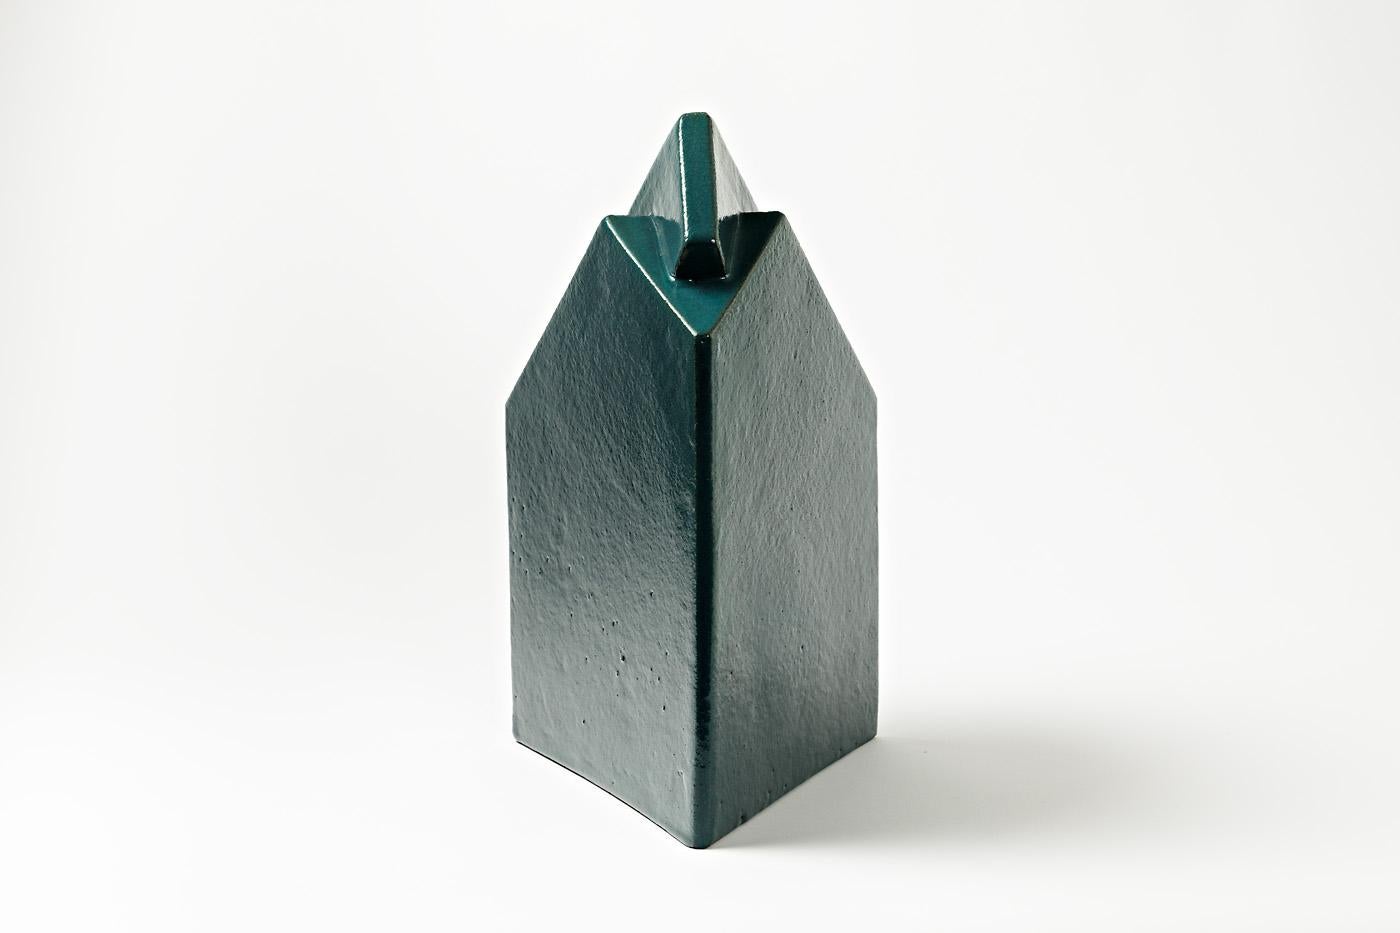 French Ceramic Sculpture by Daniel Maes with Green Glaze Decoration, circa 1990